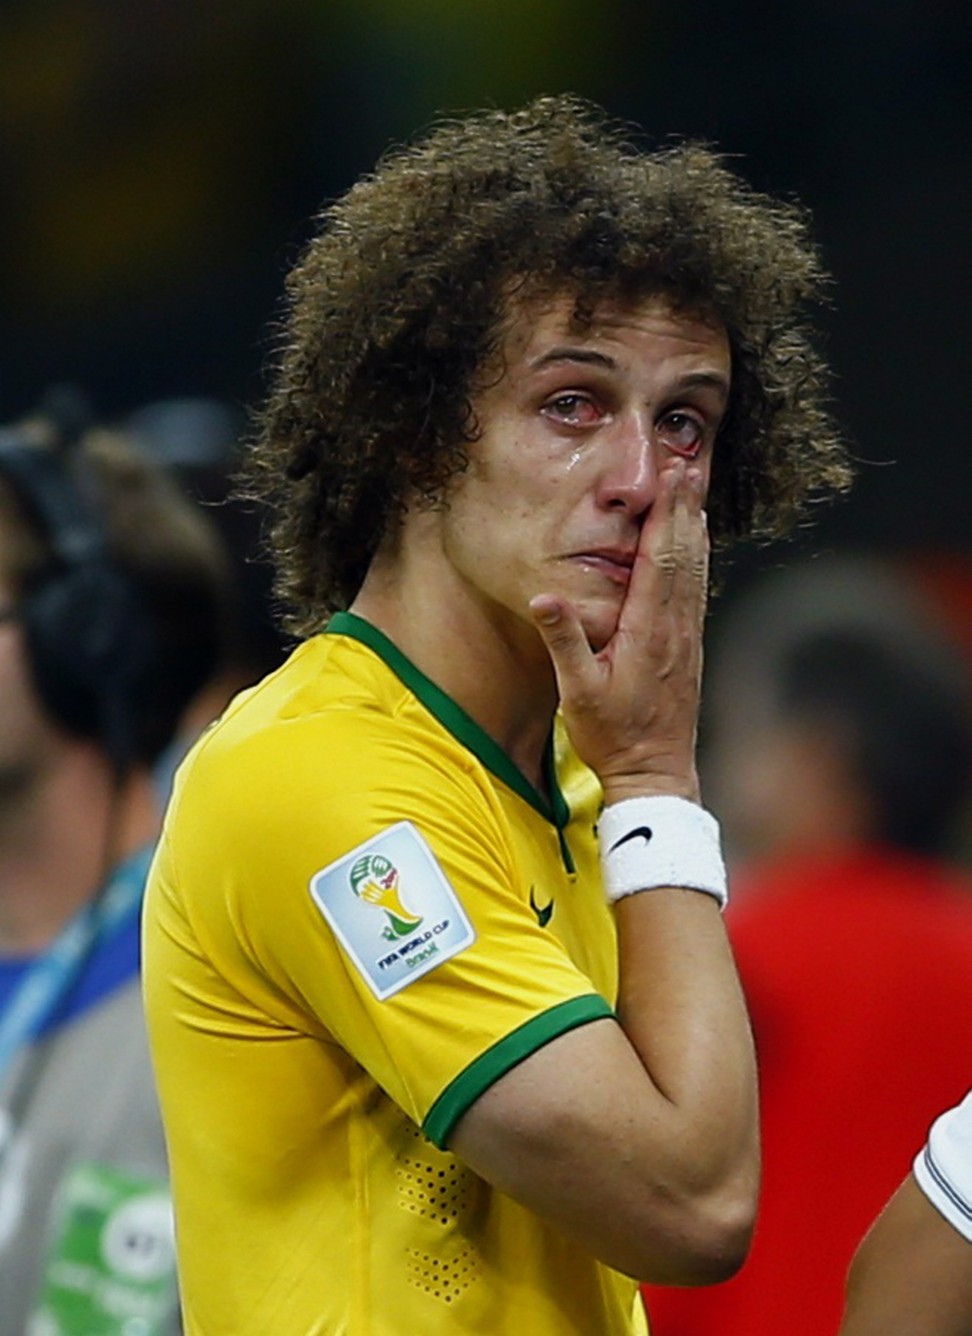 Brazil defender David Luiz cries after the 7-1 defeat by Germany in their 2014 World Cup semi-final. Photo: Reuters